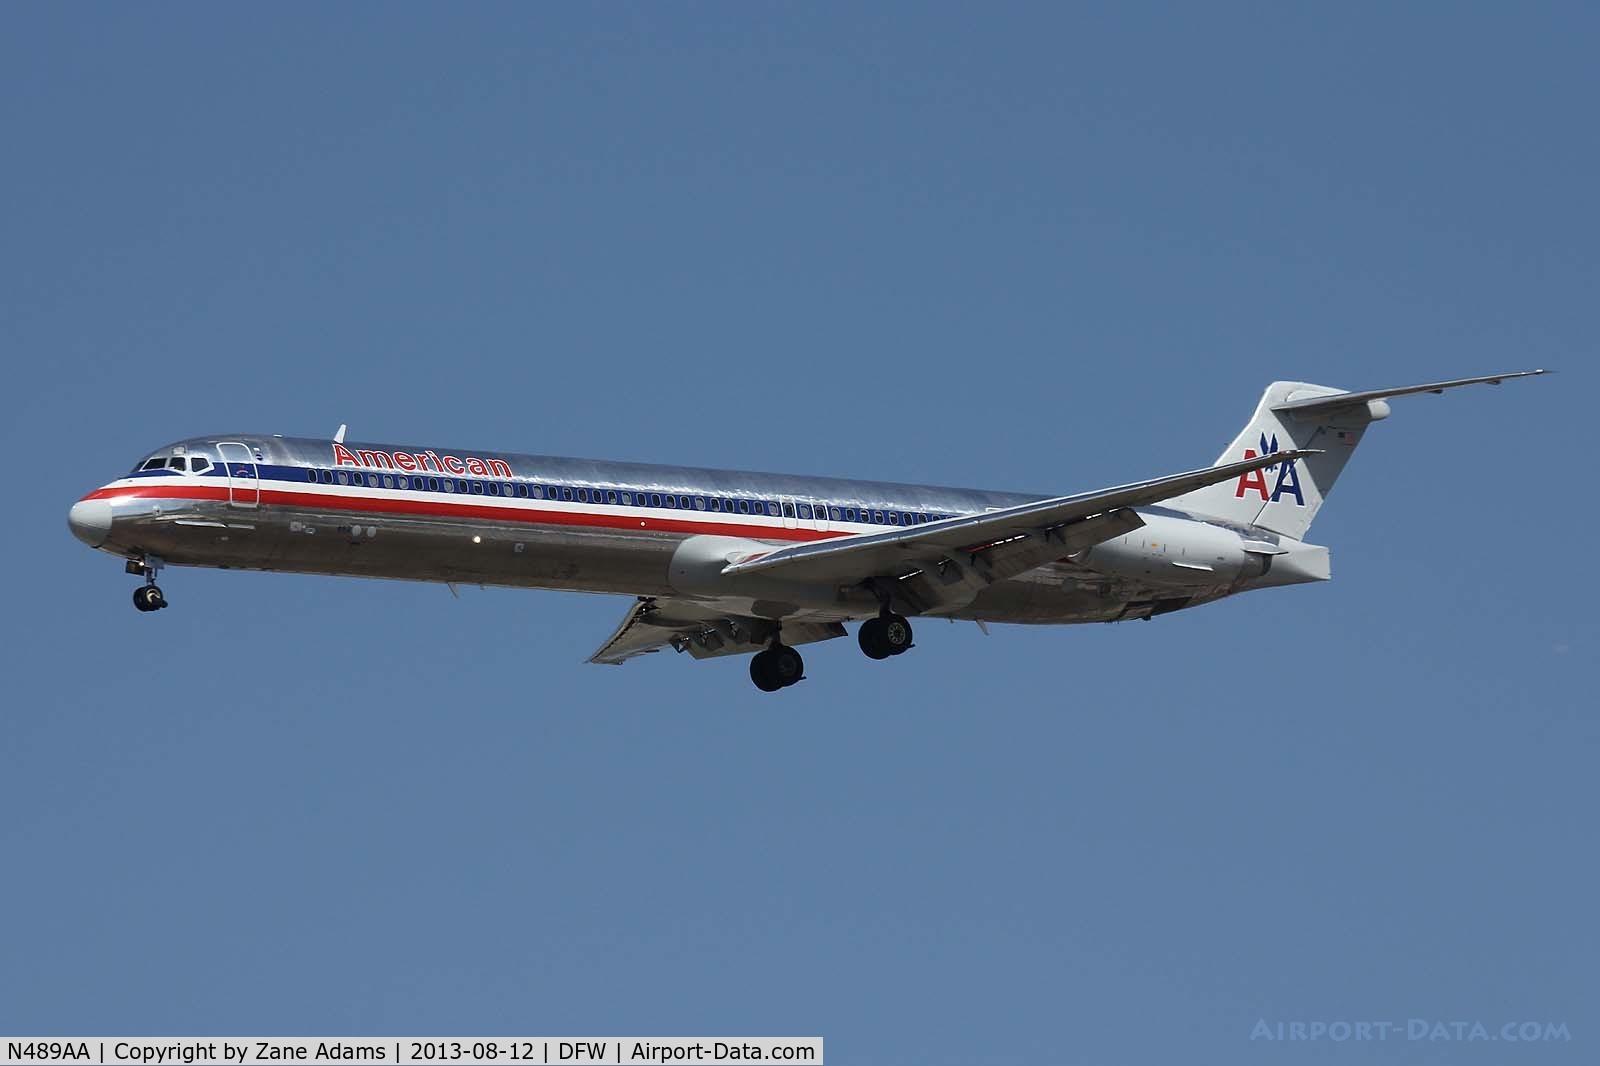 N489AA, 1989 McDonnell Douglas MD-82 (DC-9-82) C/N 49682, Landing at DFW Airport